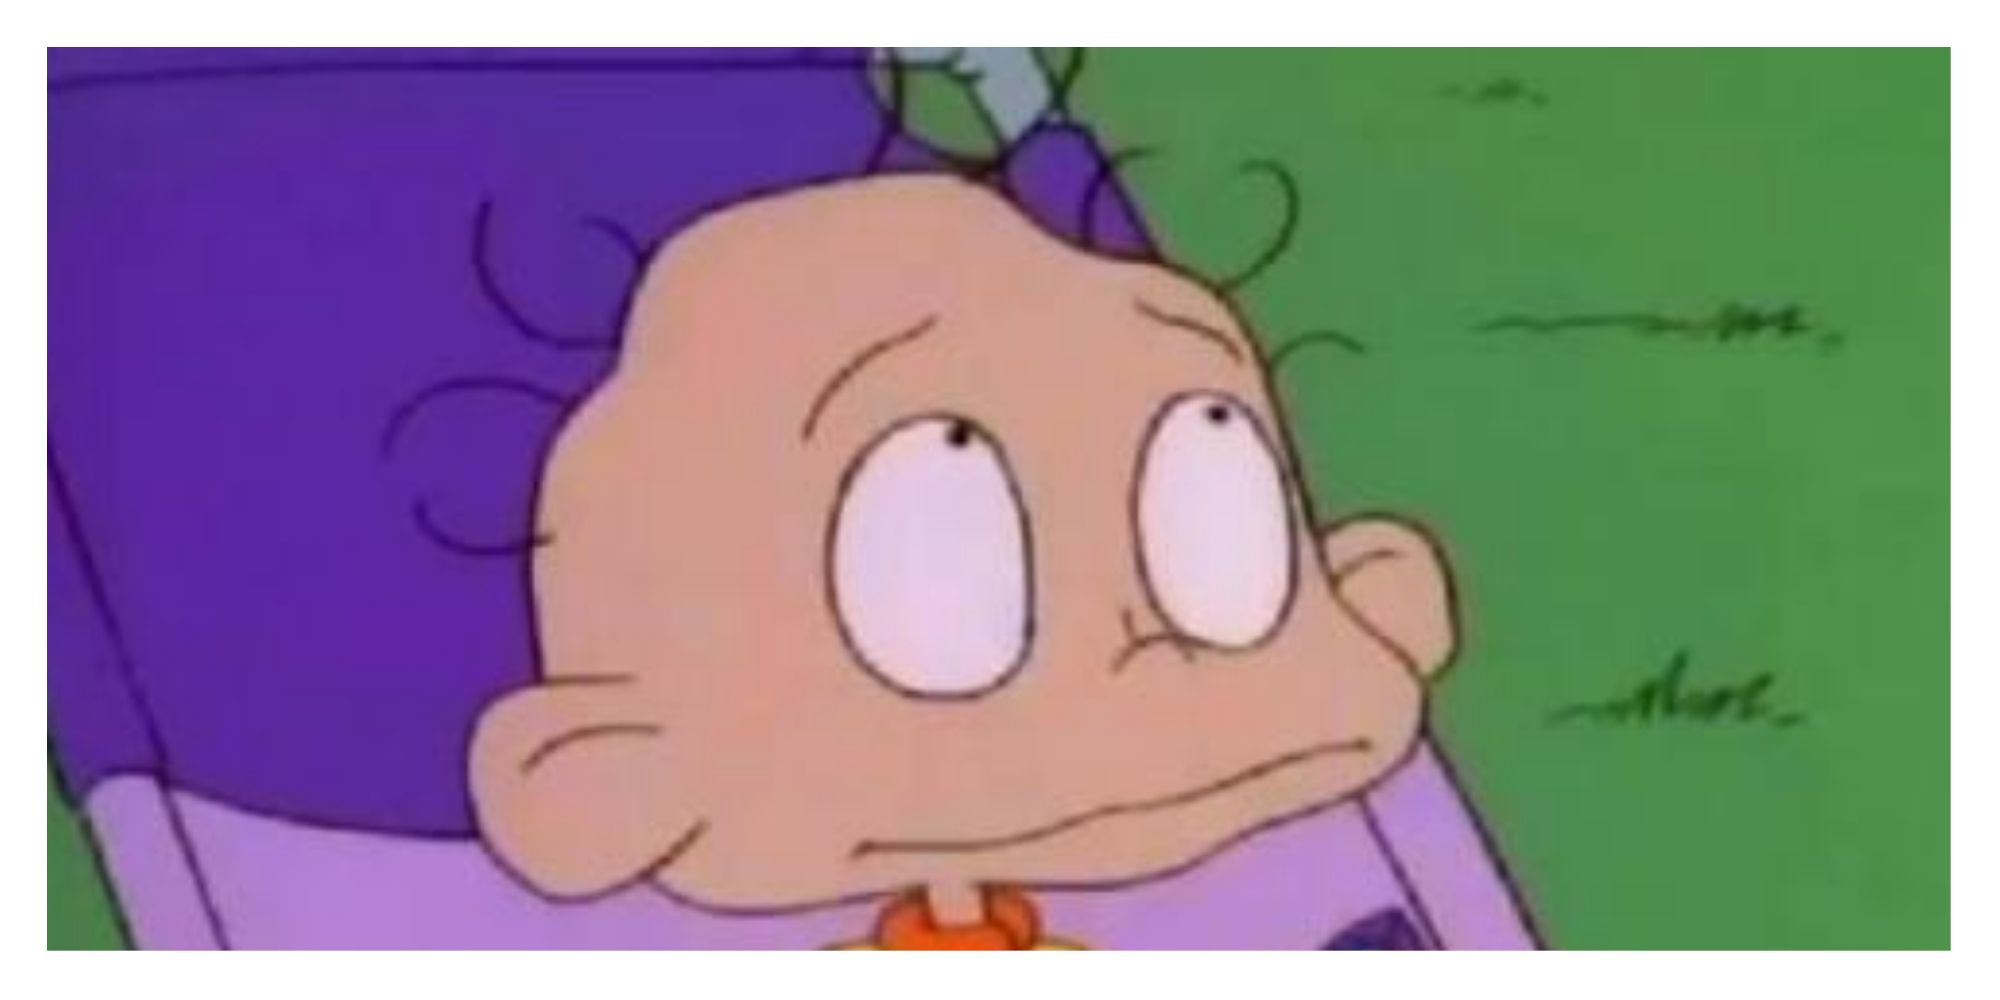 Dil Pickles from Rugrats